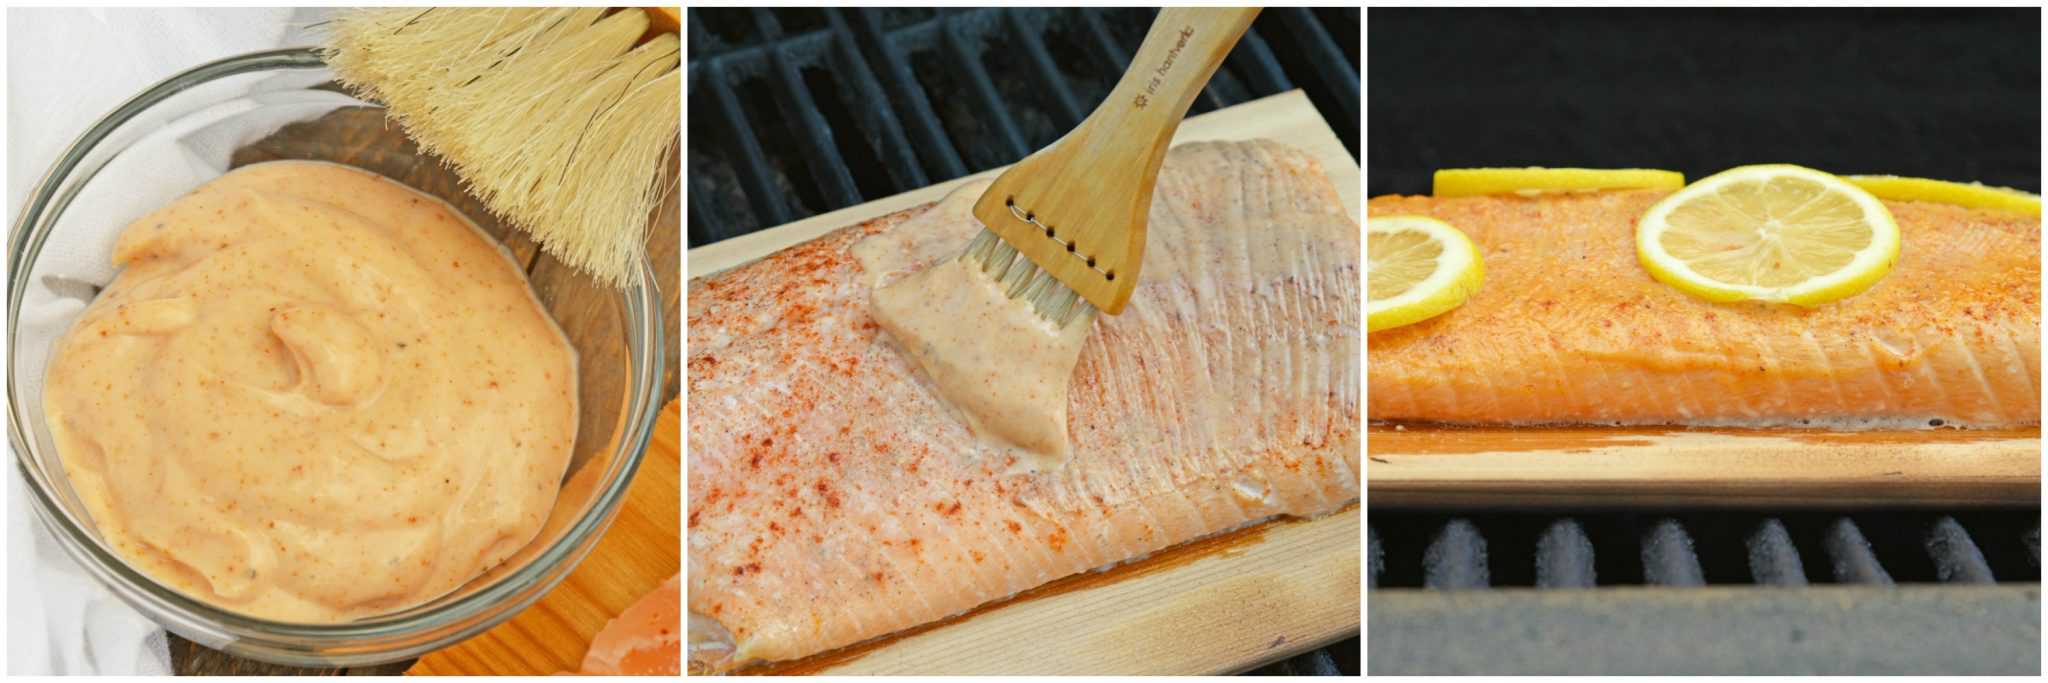 Spicy Cedar Plank Salmon is an easy grilled salmon recipe using a spicy salmon glaze. Perfect for a hot summer night and pairing with a crisp, sweet wine. #cedarplanksalmon #salmononthegrill #spicysalmon www.savoryexperiments.com